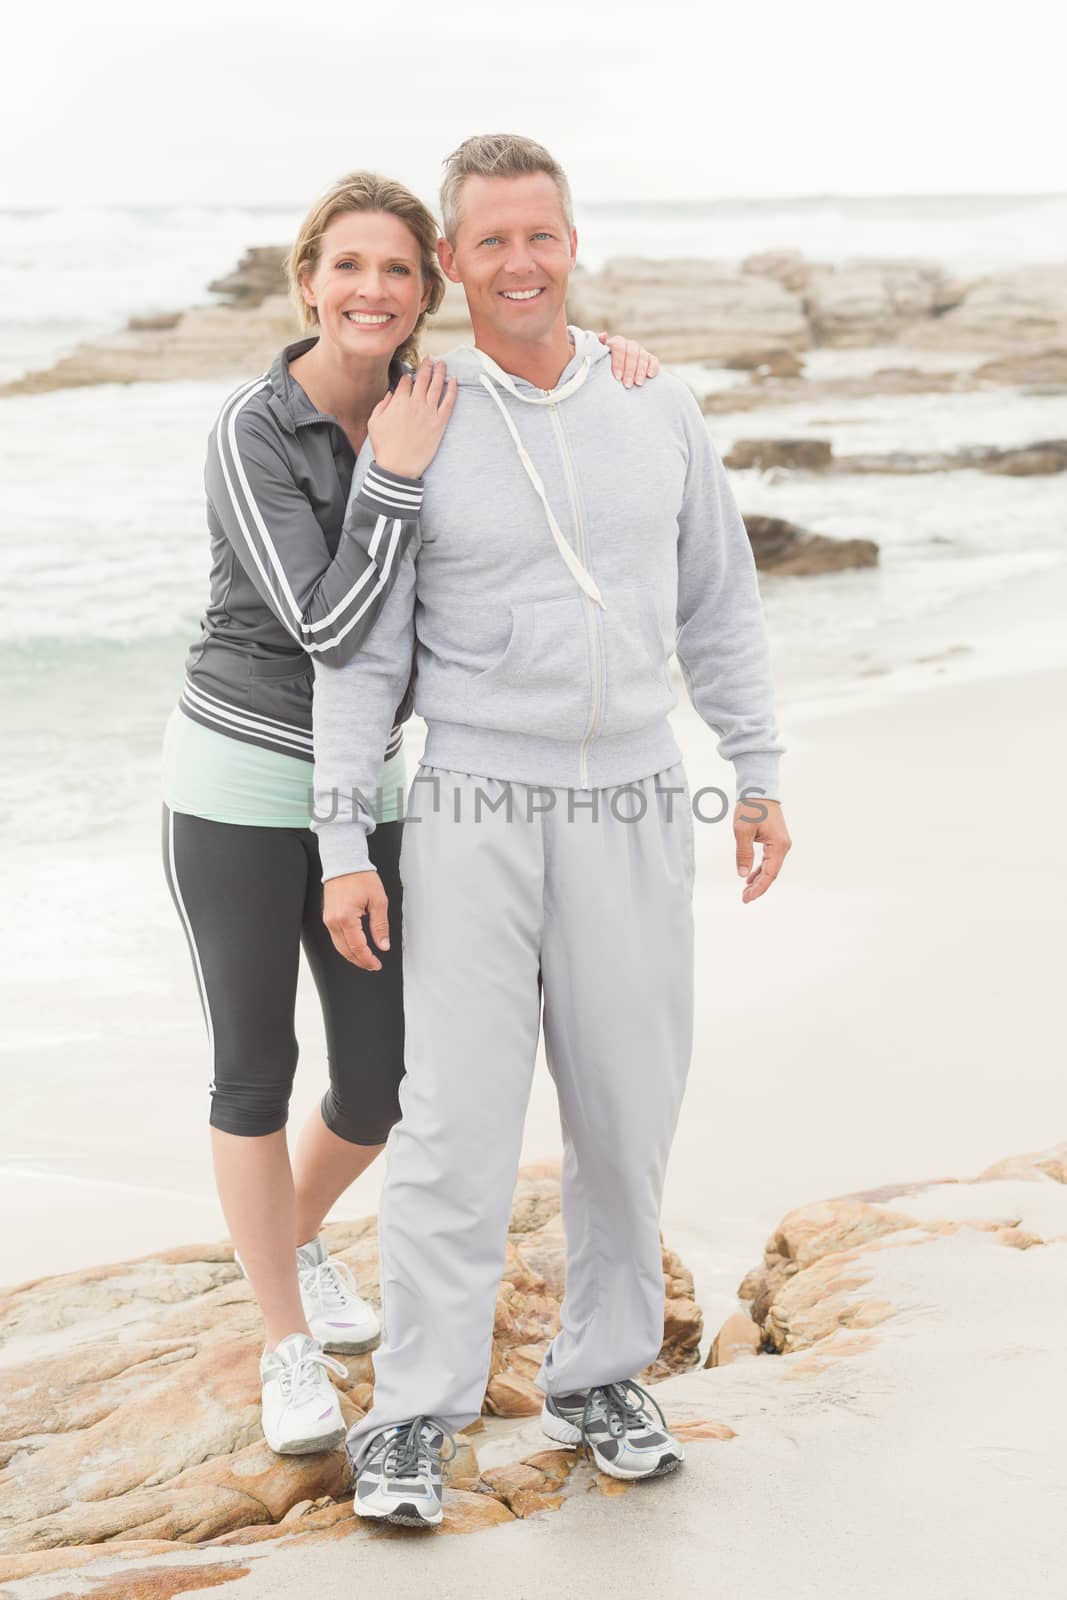 Fit couple smiling at camera at the beach